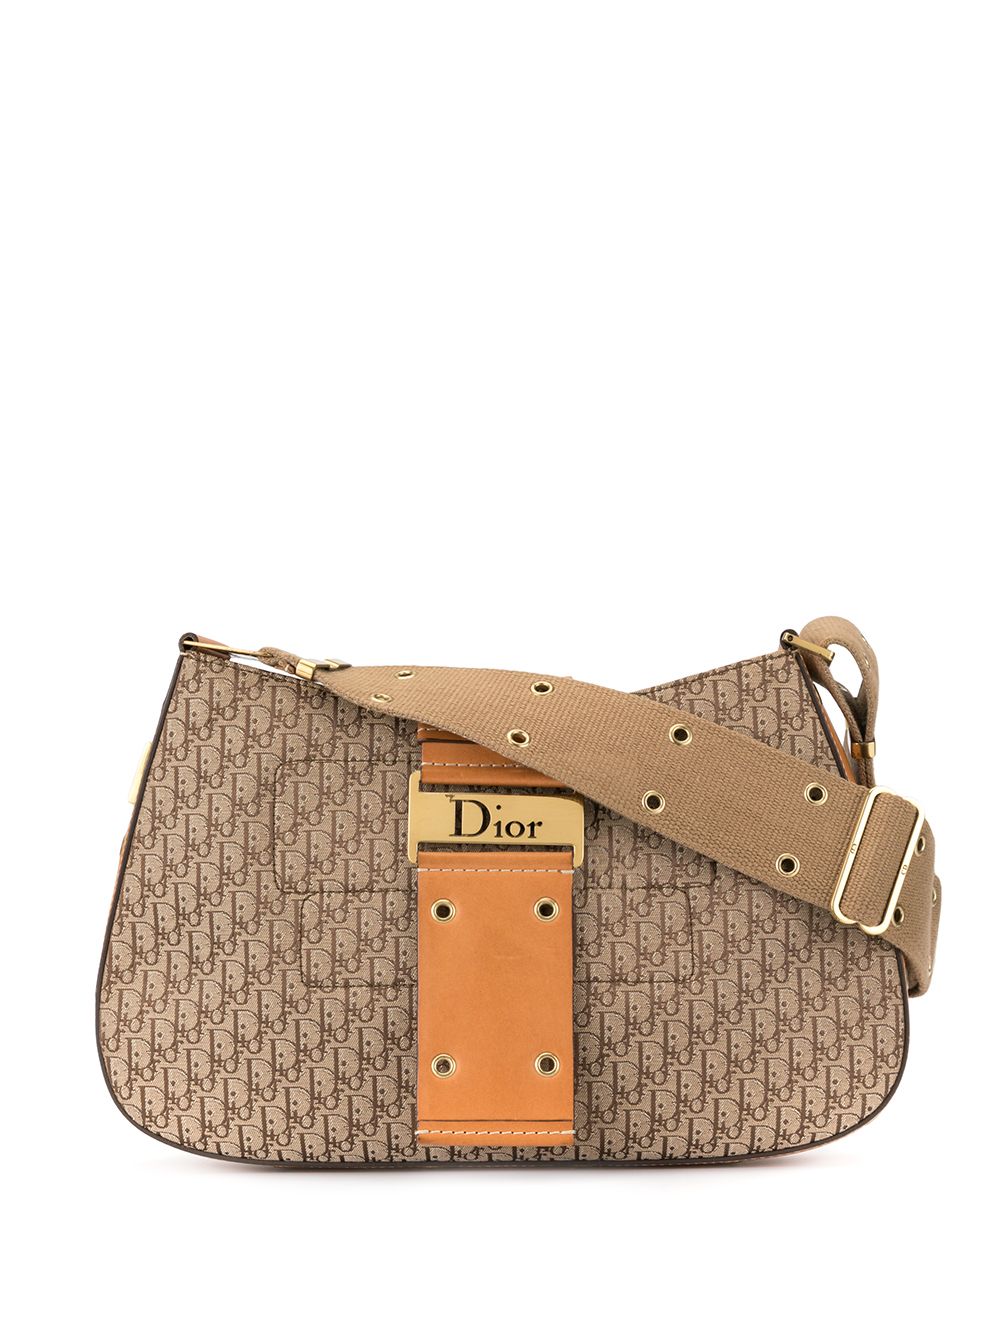 Christian Dior pre-owned Trotter Travel Bag - Farfetch